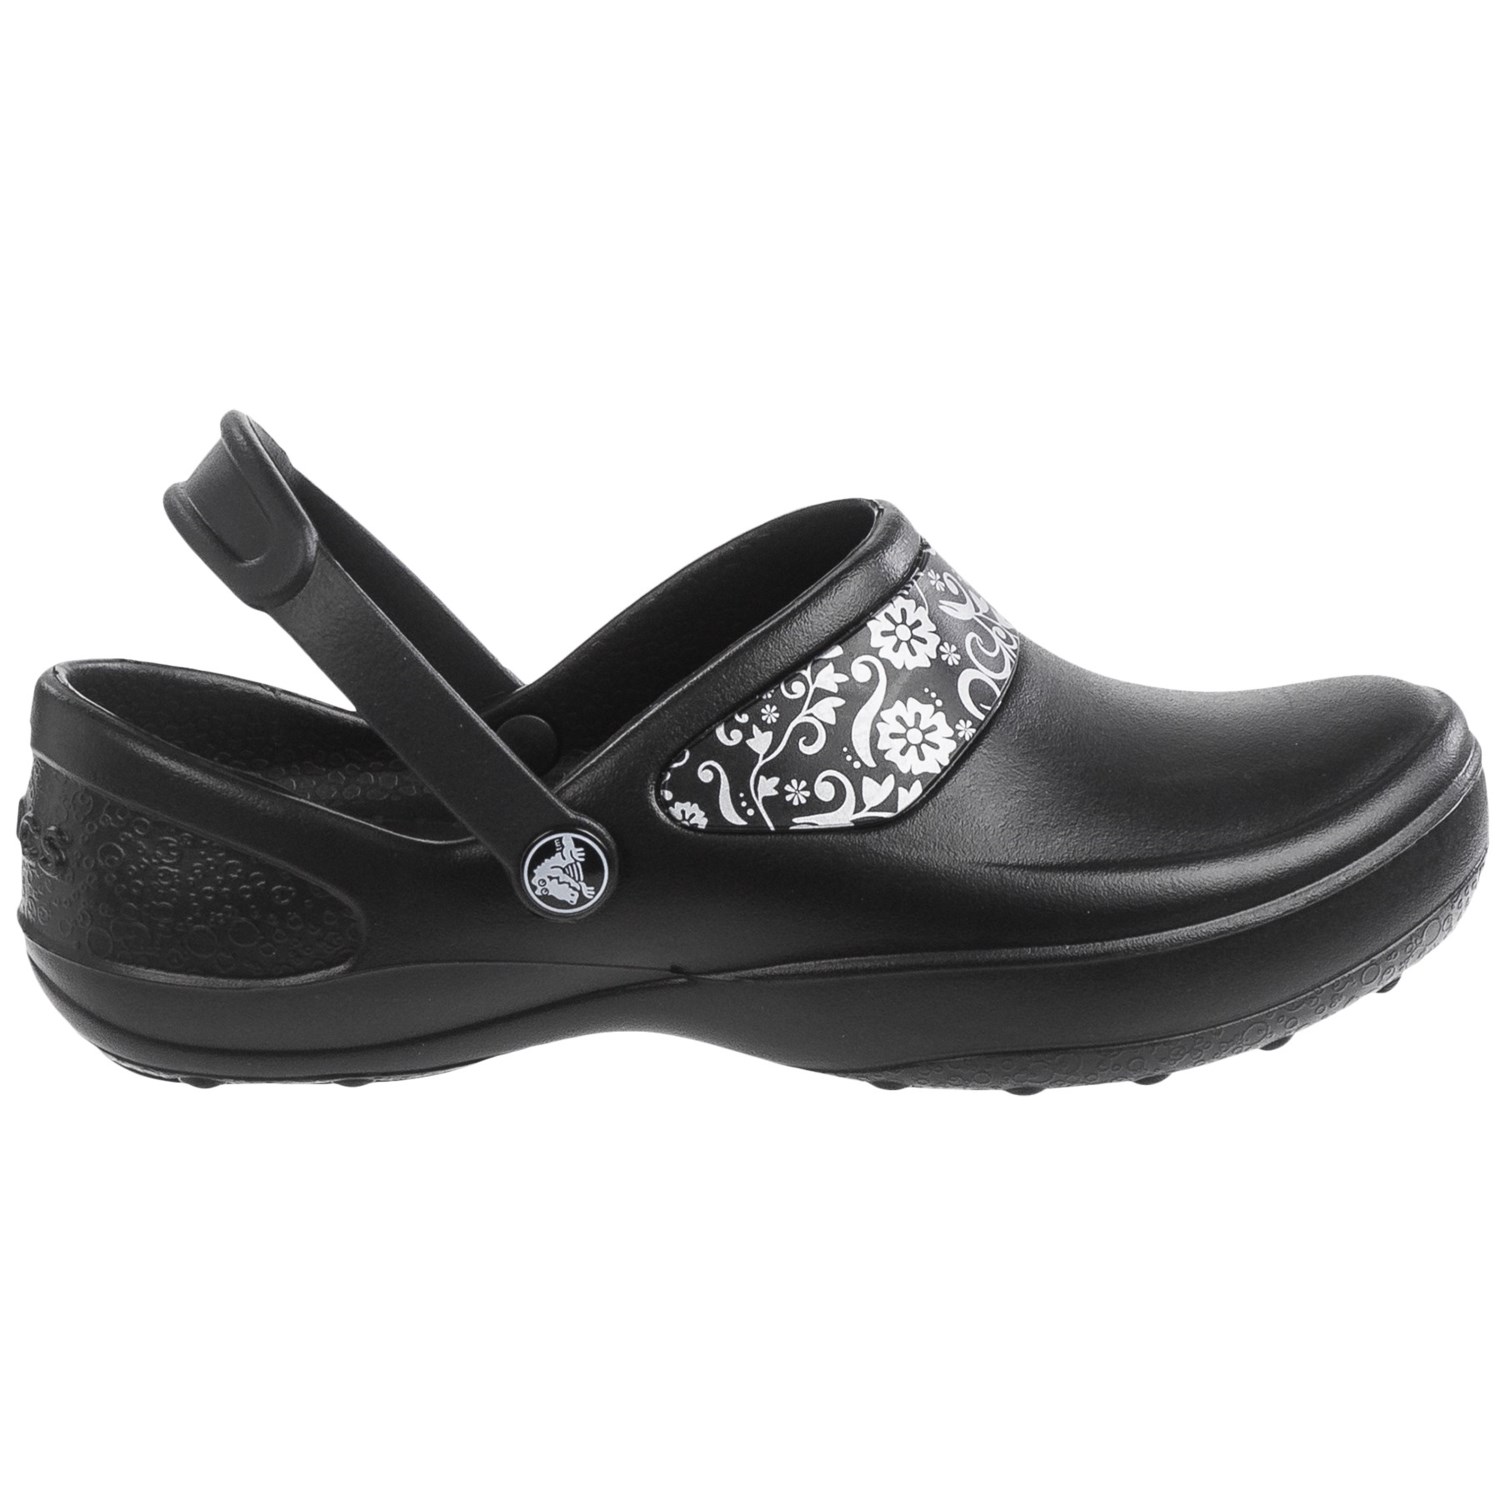 Crocs Mercy Work Shoes (For Women) - Save 55%